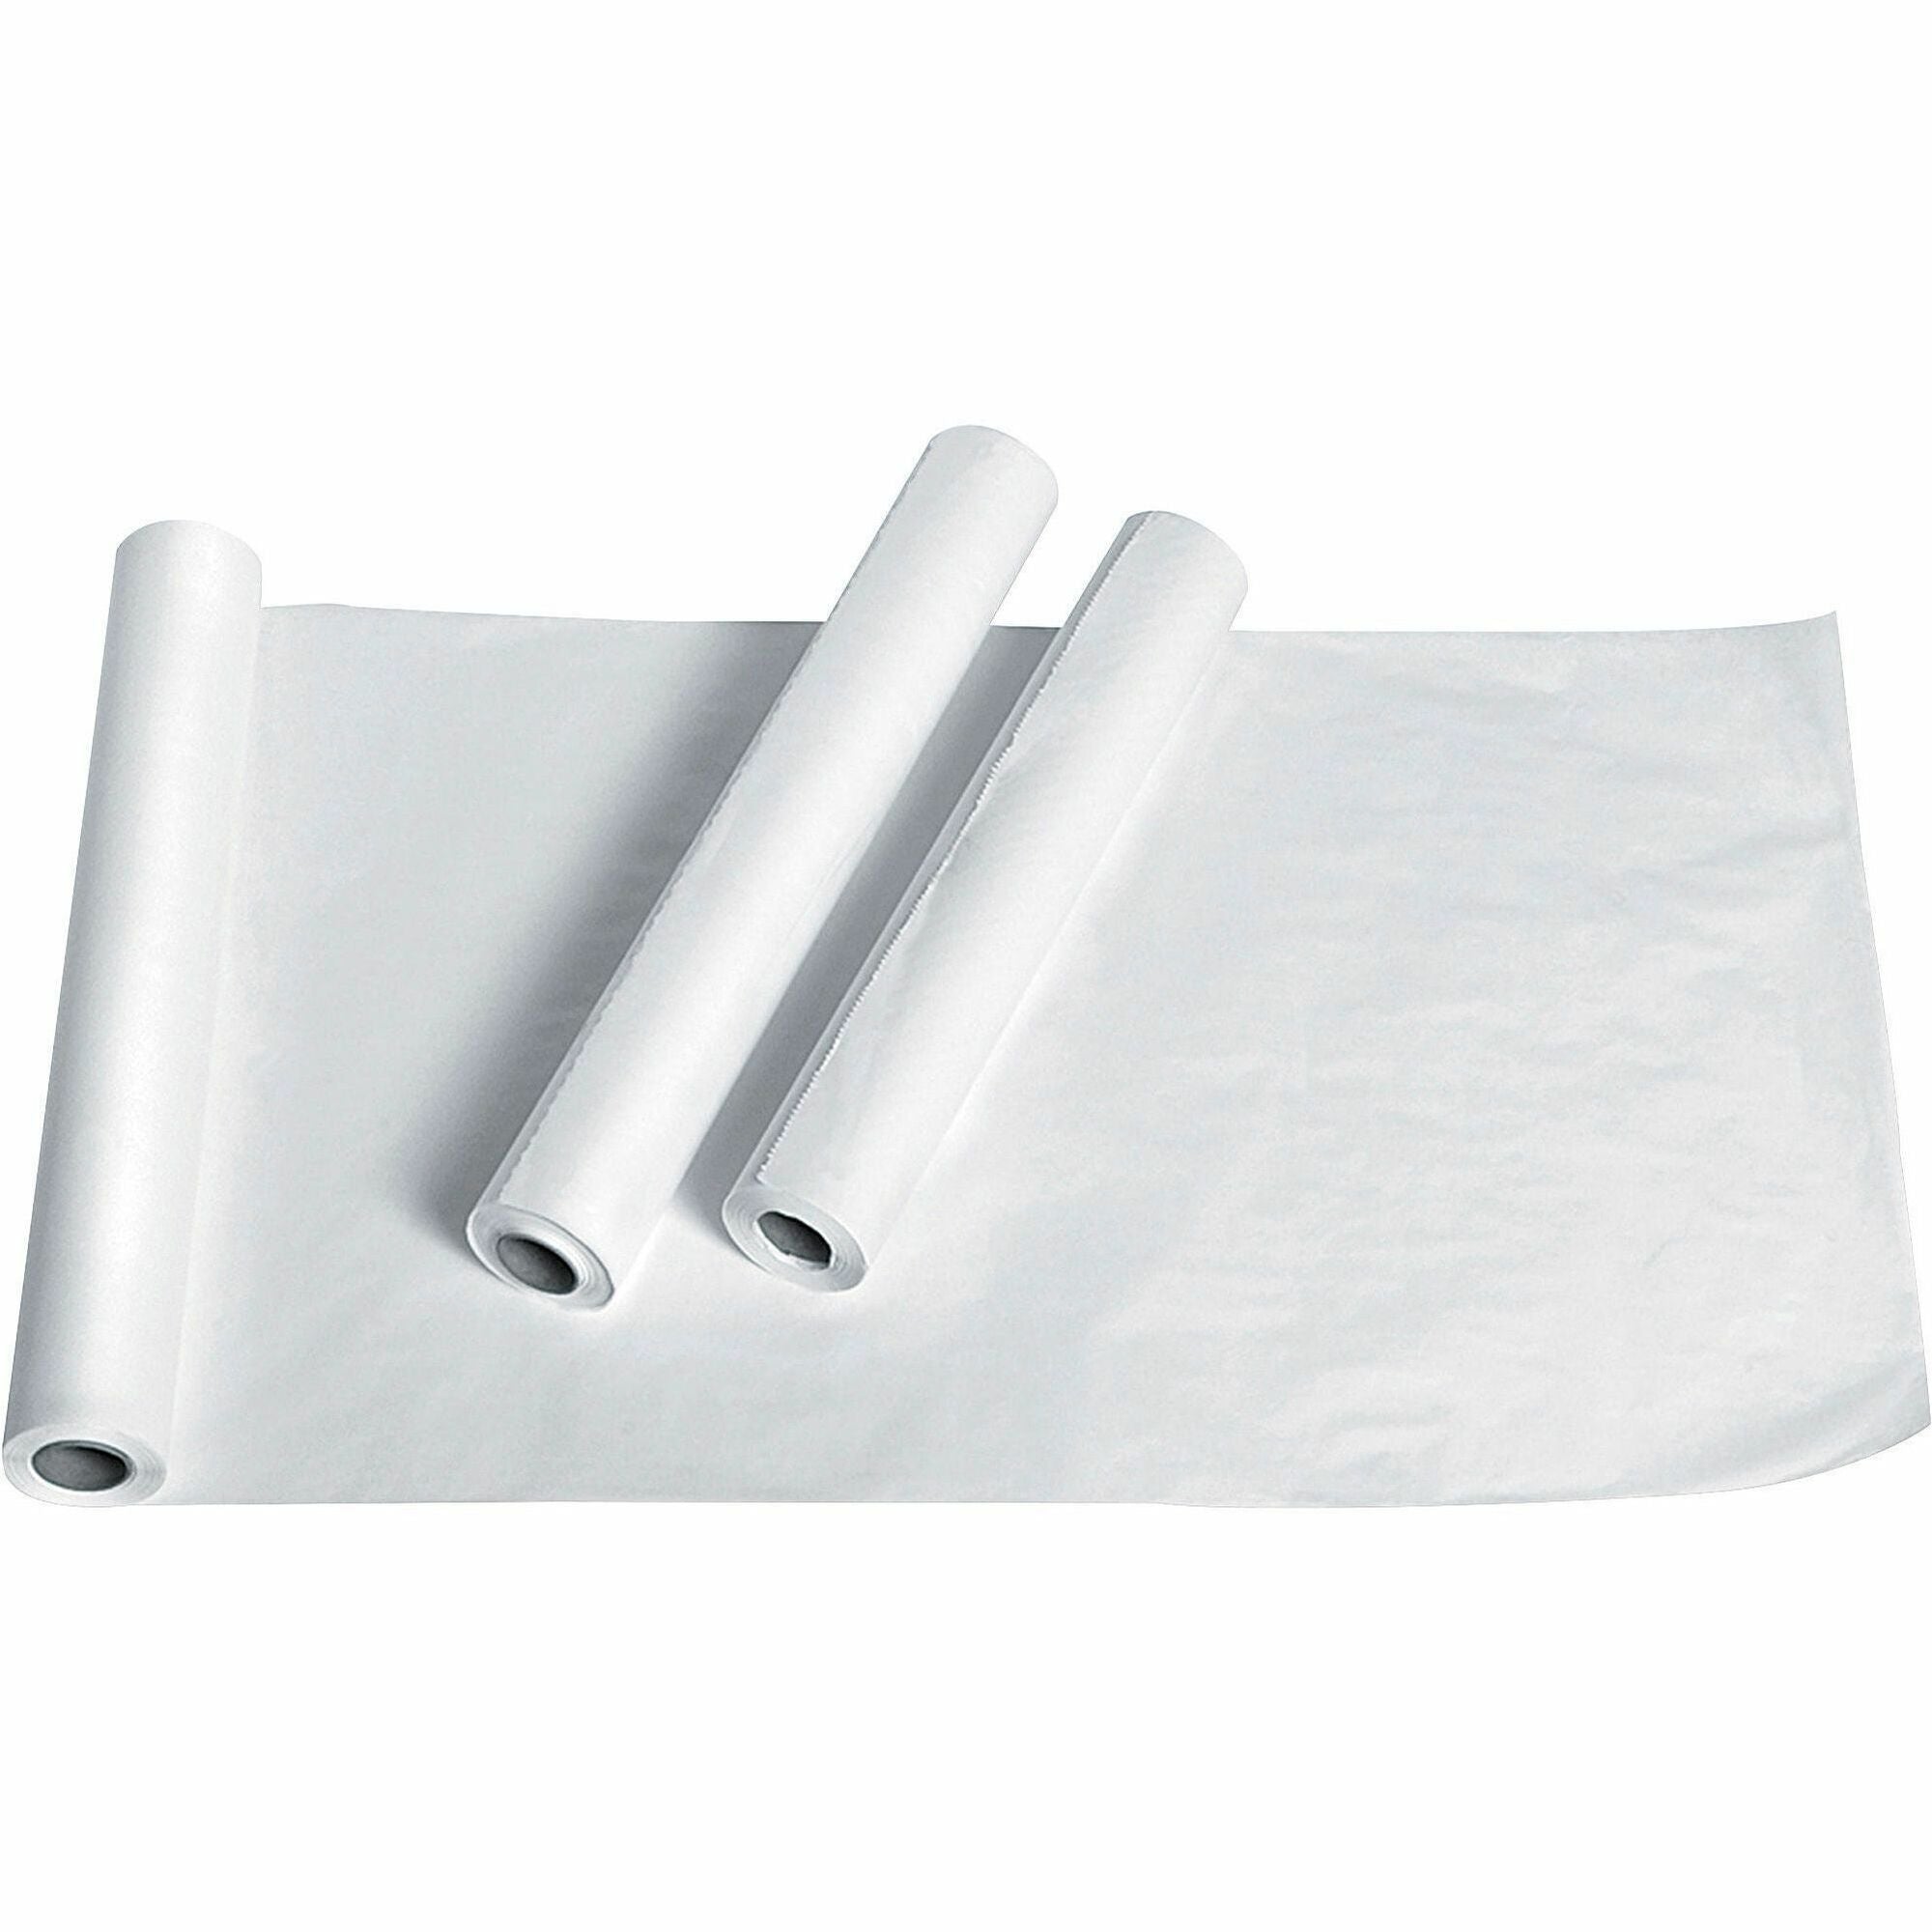 Medline Standard Smooth Exam Table Paper - 225 ft Length x 18" Width - Paper - Crepe - 12 / Carton